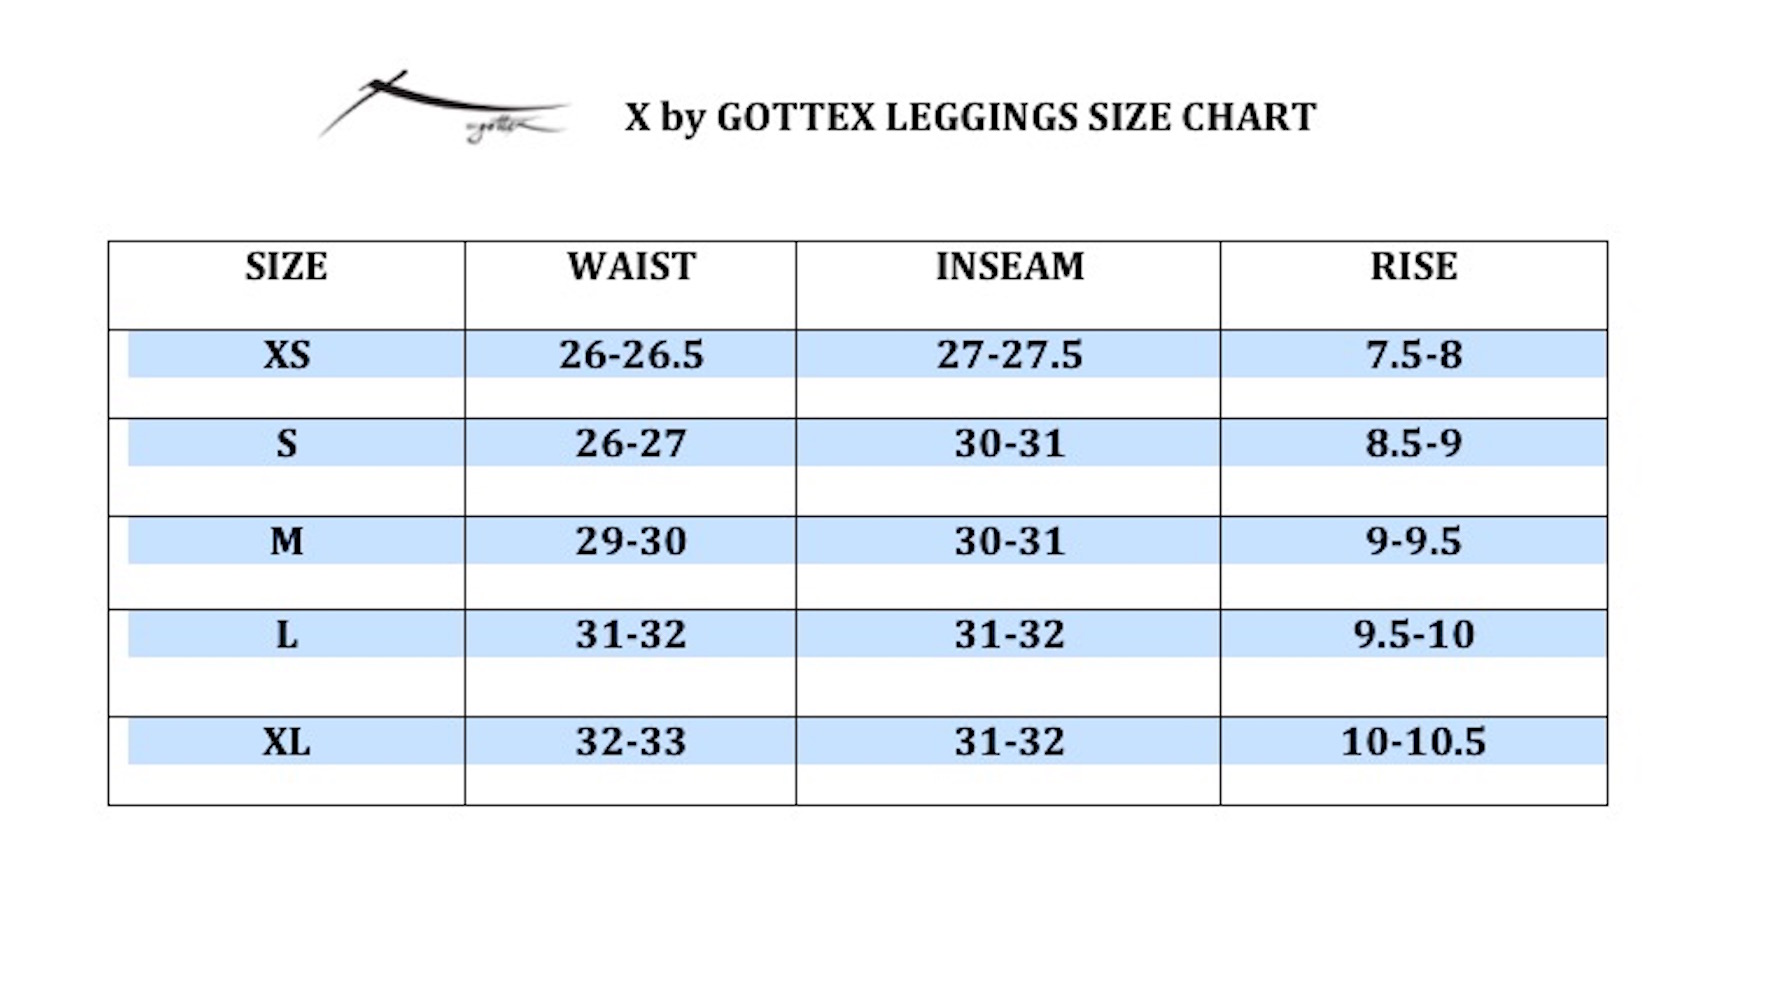 Lux Size Chart